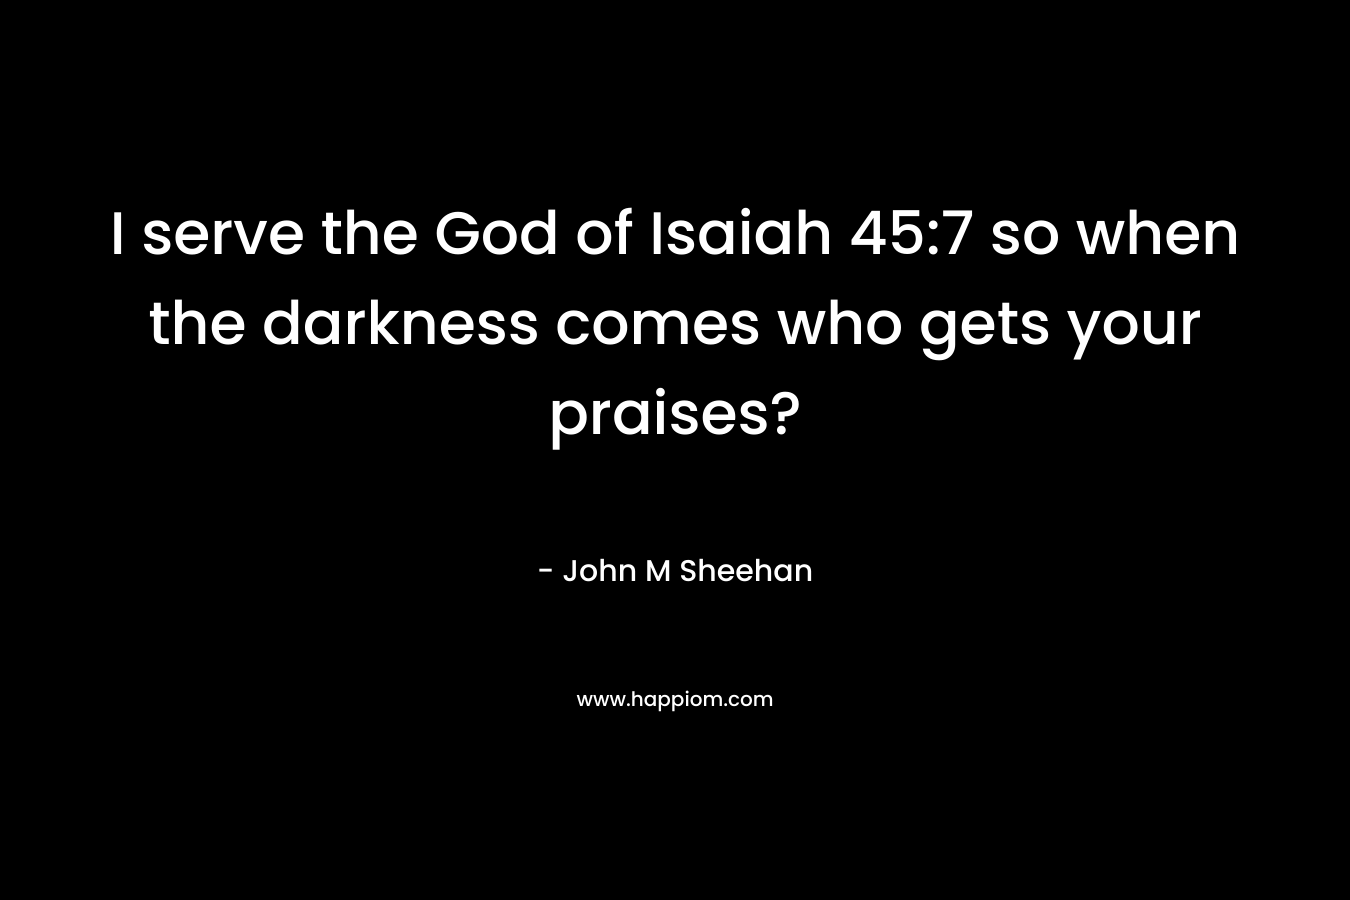 I serve the God of Isaiah 45:7 so when the darkness comes who gets your praises? – John M Sheehan